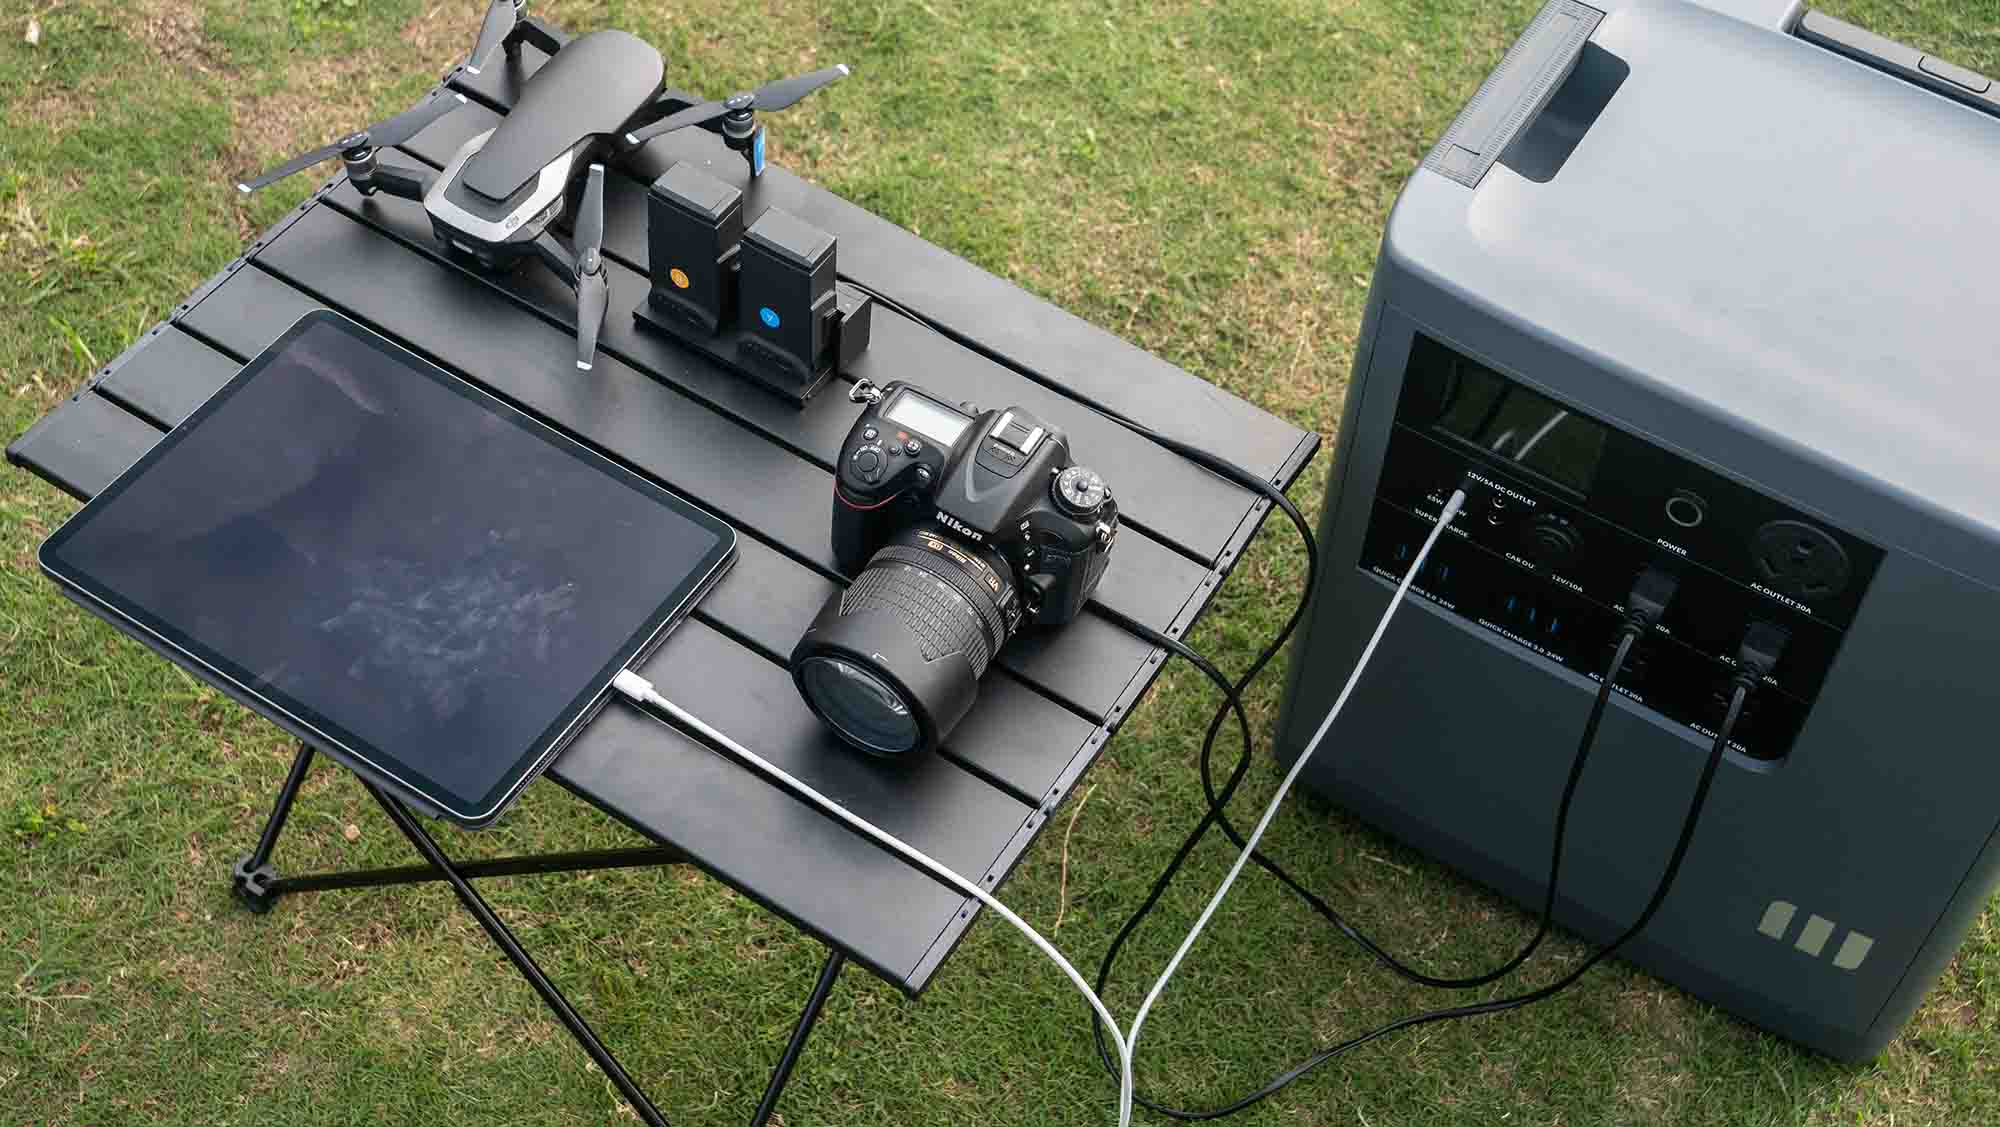 Mango Power E Charging a Tablet, Camera, and a Drone